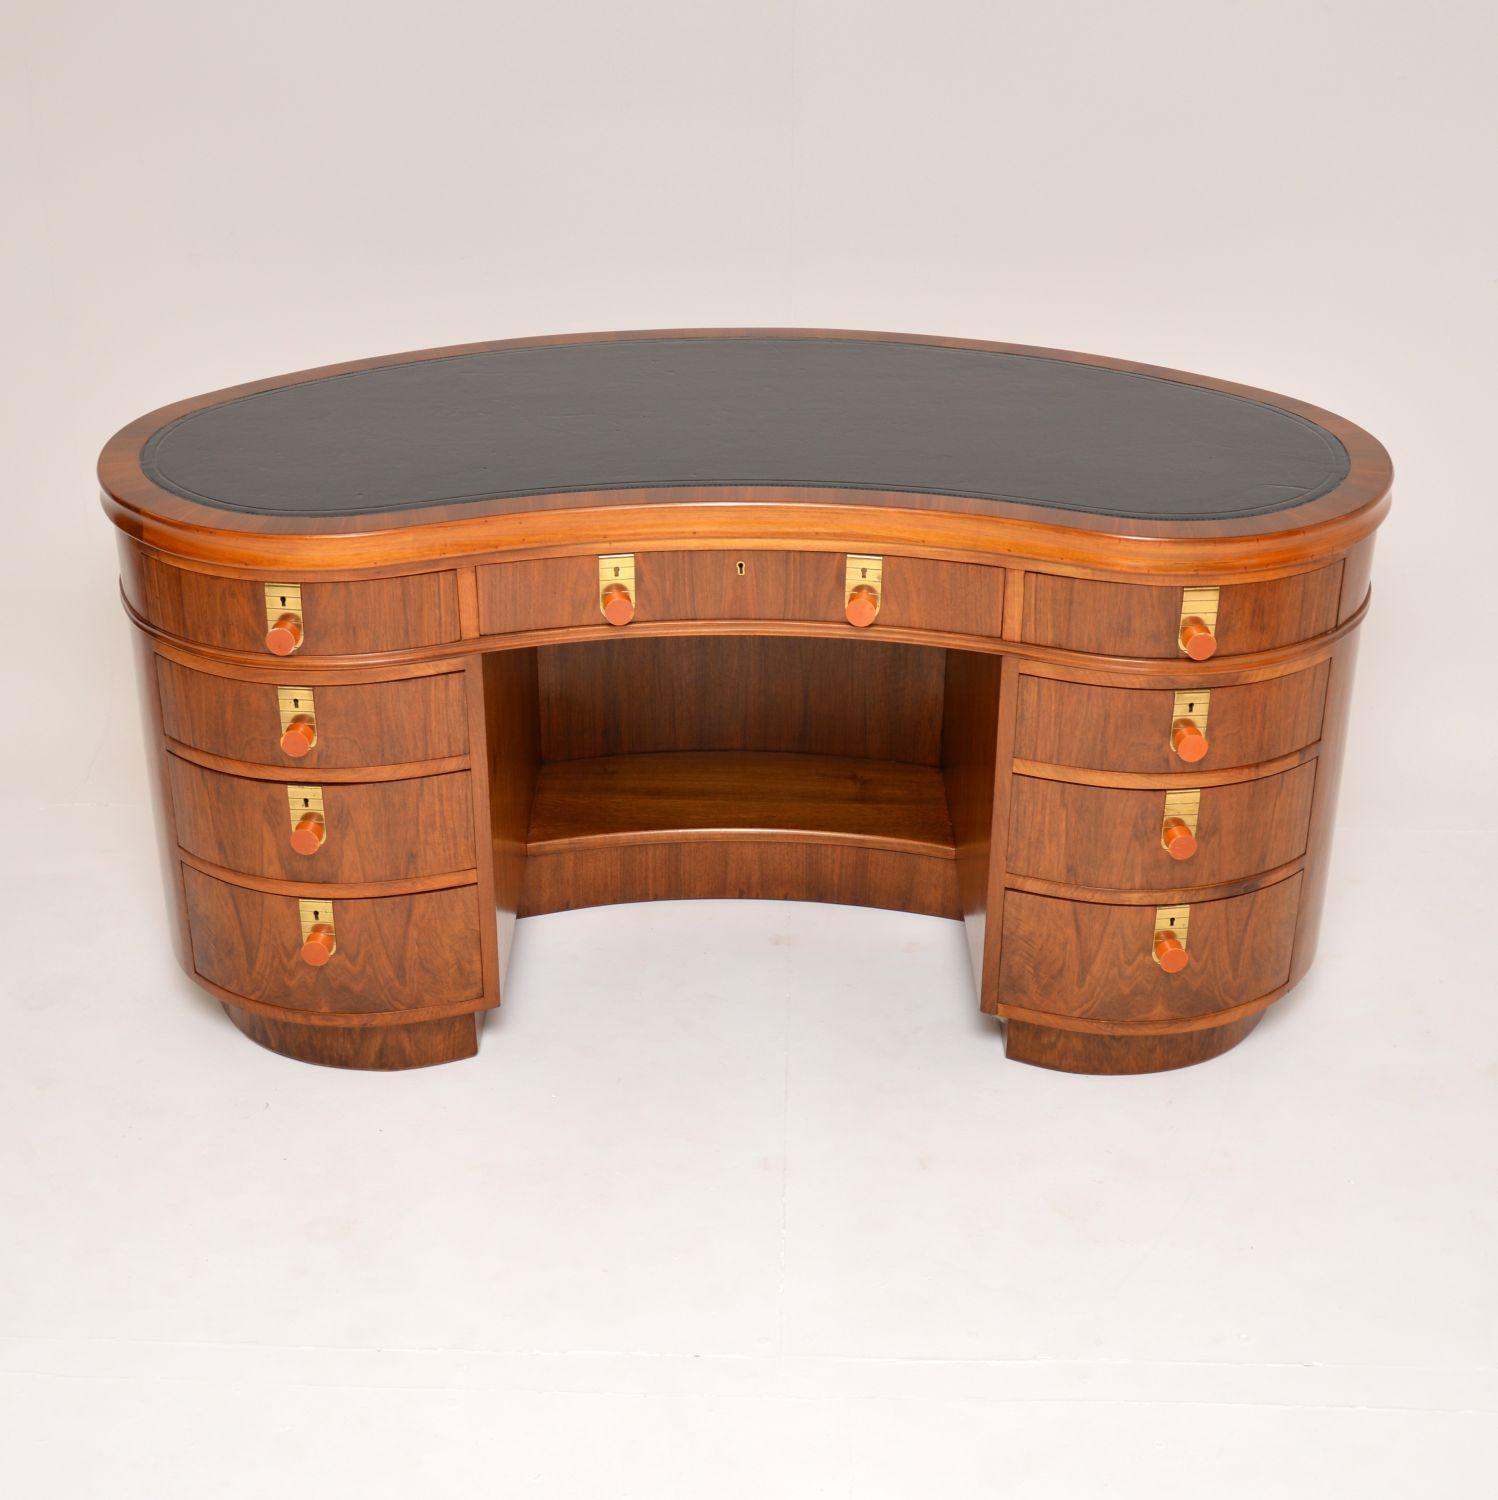 An exceptional and very rare vintage Art Deco desk in walnut, this was made in London by Laszlo Hoenig. It dates from the 1930-50’s.

The quality is outstanding, this is extremely well made and is a most impressive piece. It has a kidney shaped